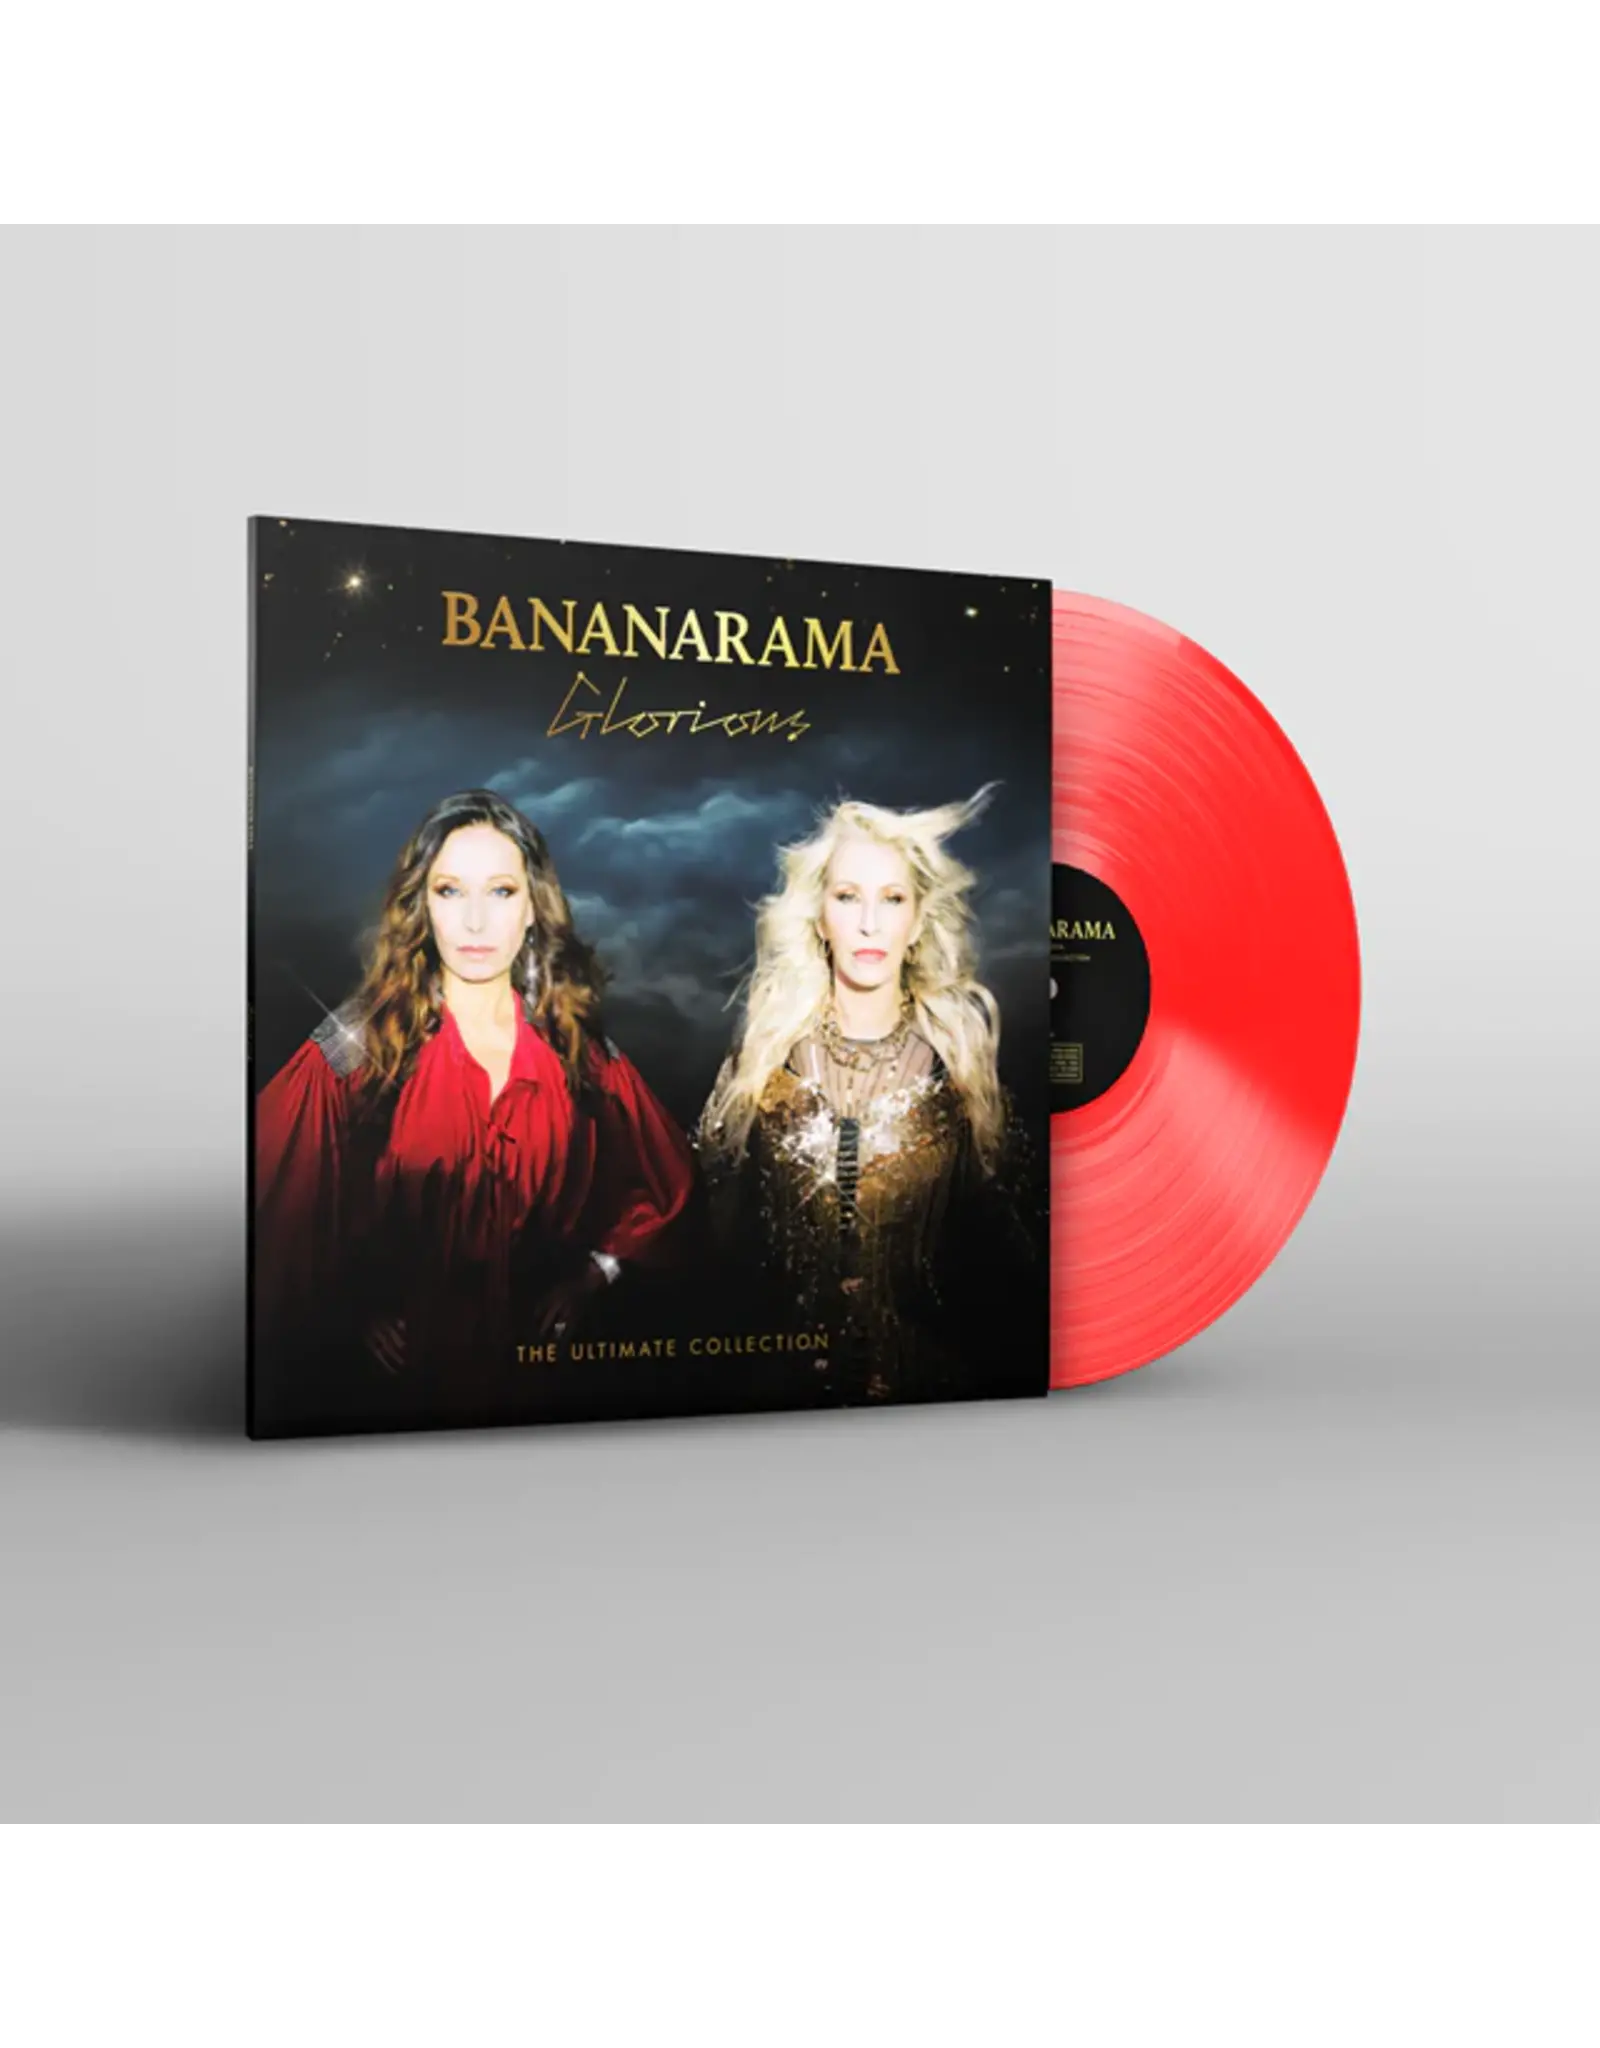 Bananarama - Glorious: The Ultimate Collection (Translucent Red Vinyl)